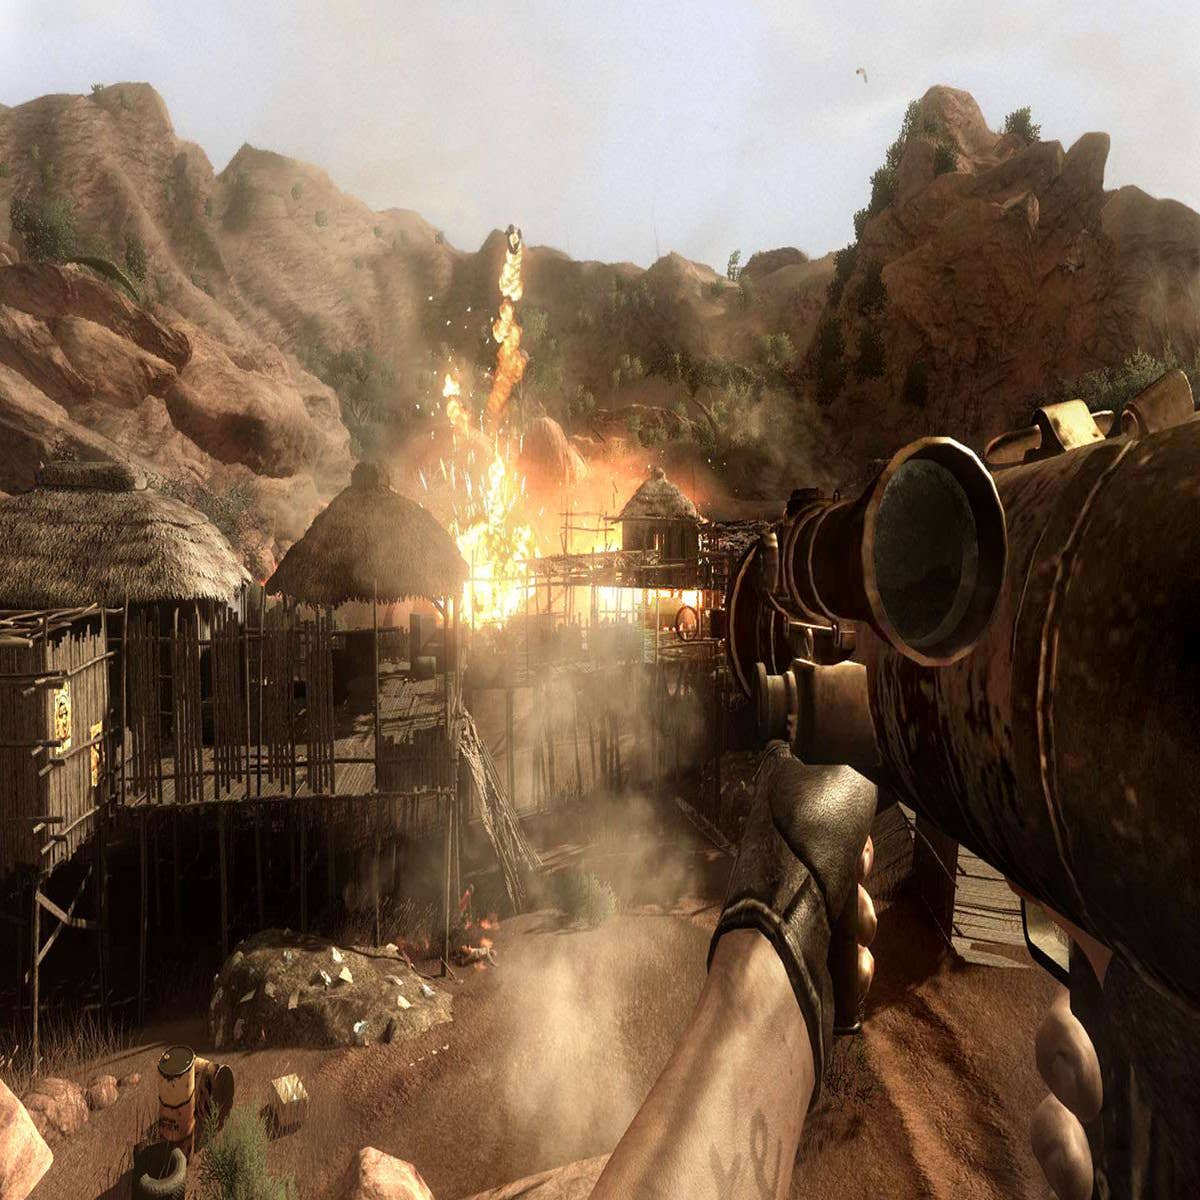 Far Cry 2's single-minded vision deserves to be remembered